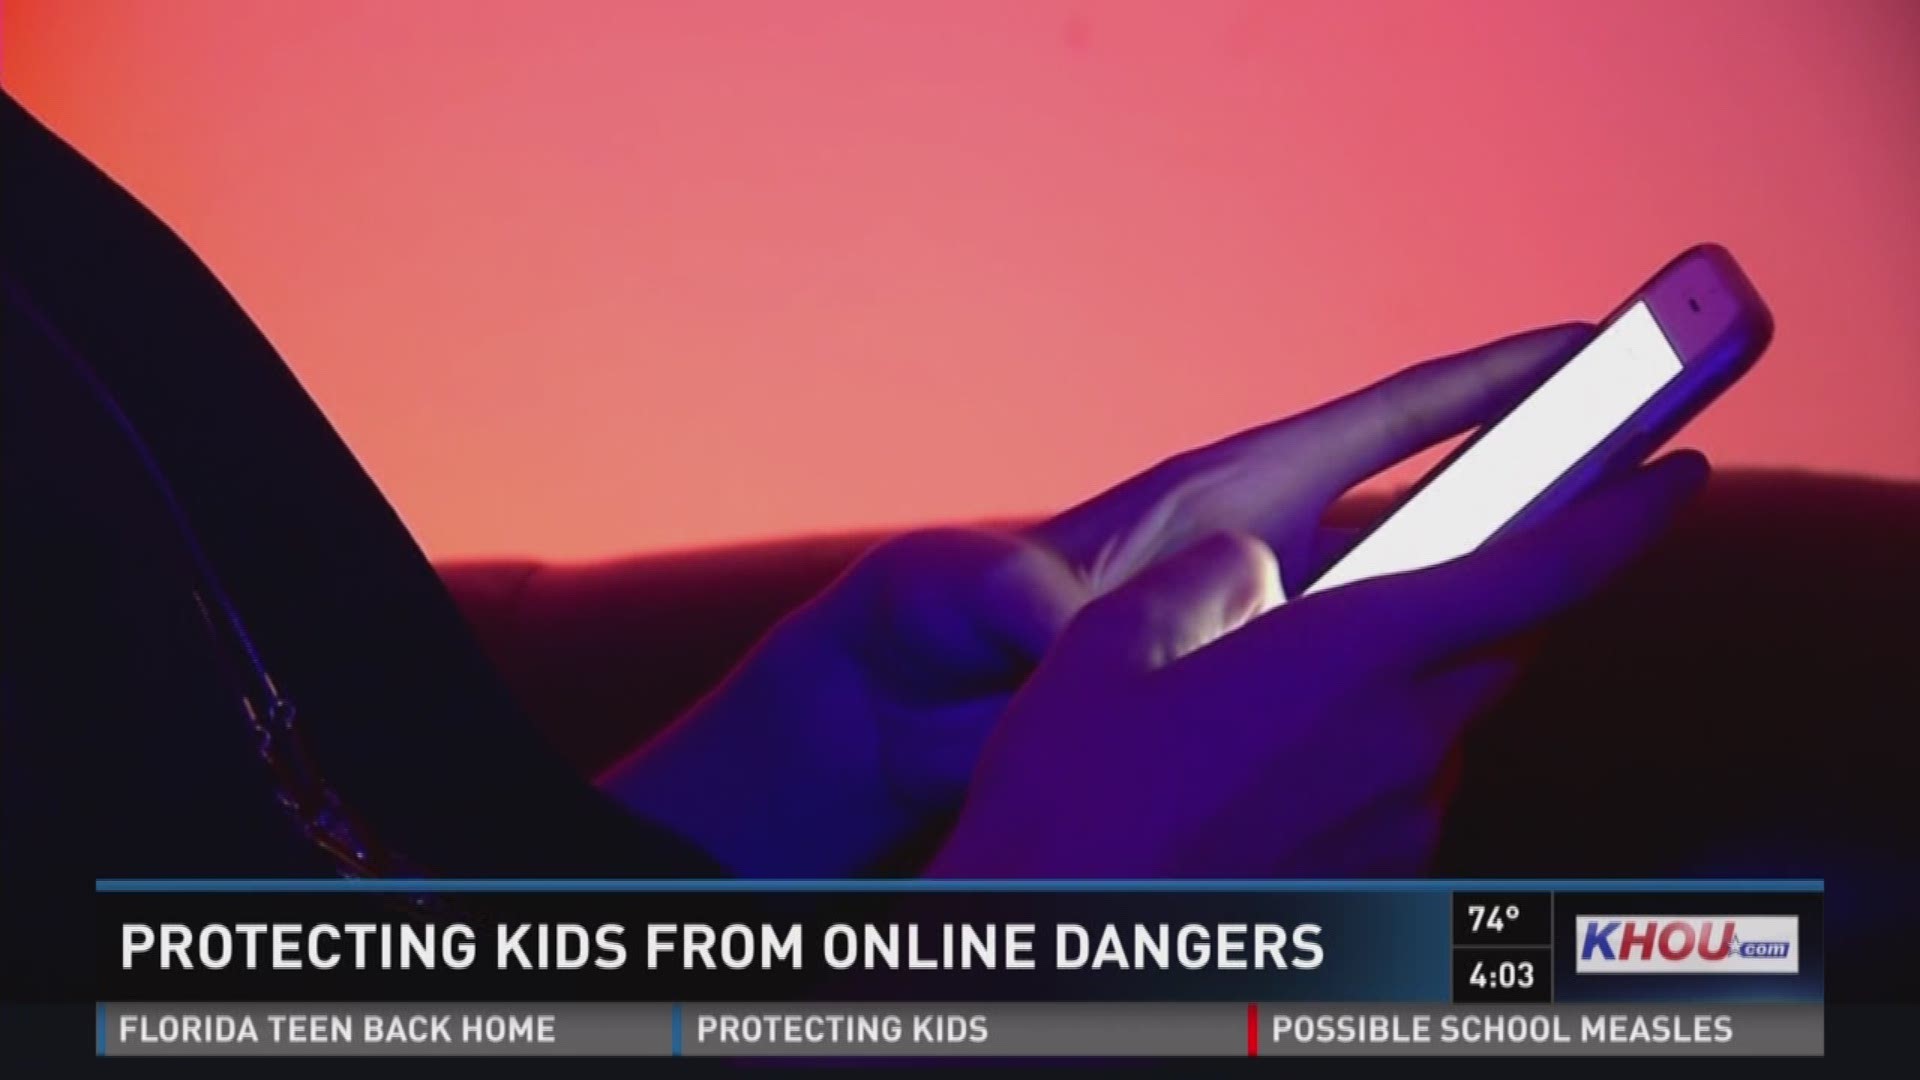 Internet crime investigators warn with new apps coming all the time, online predators are always trying to stay one step ahead of police. And mom and dad. But there are also apps to help parents protect their children.